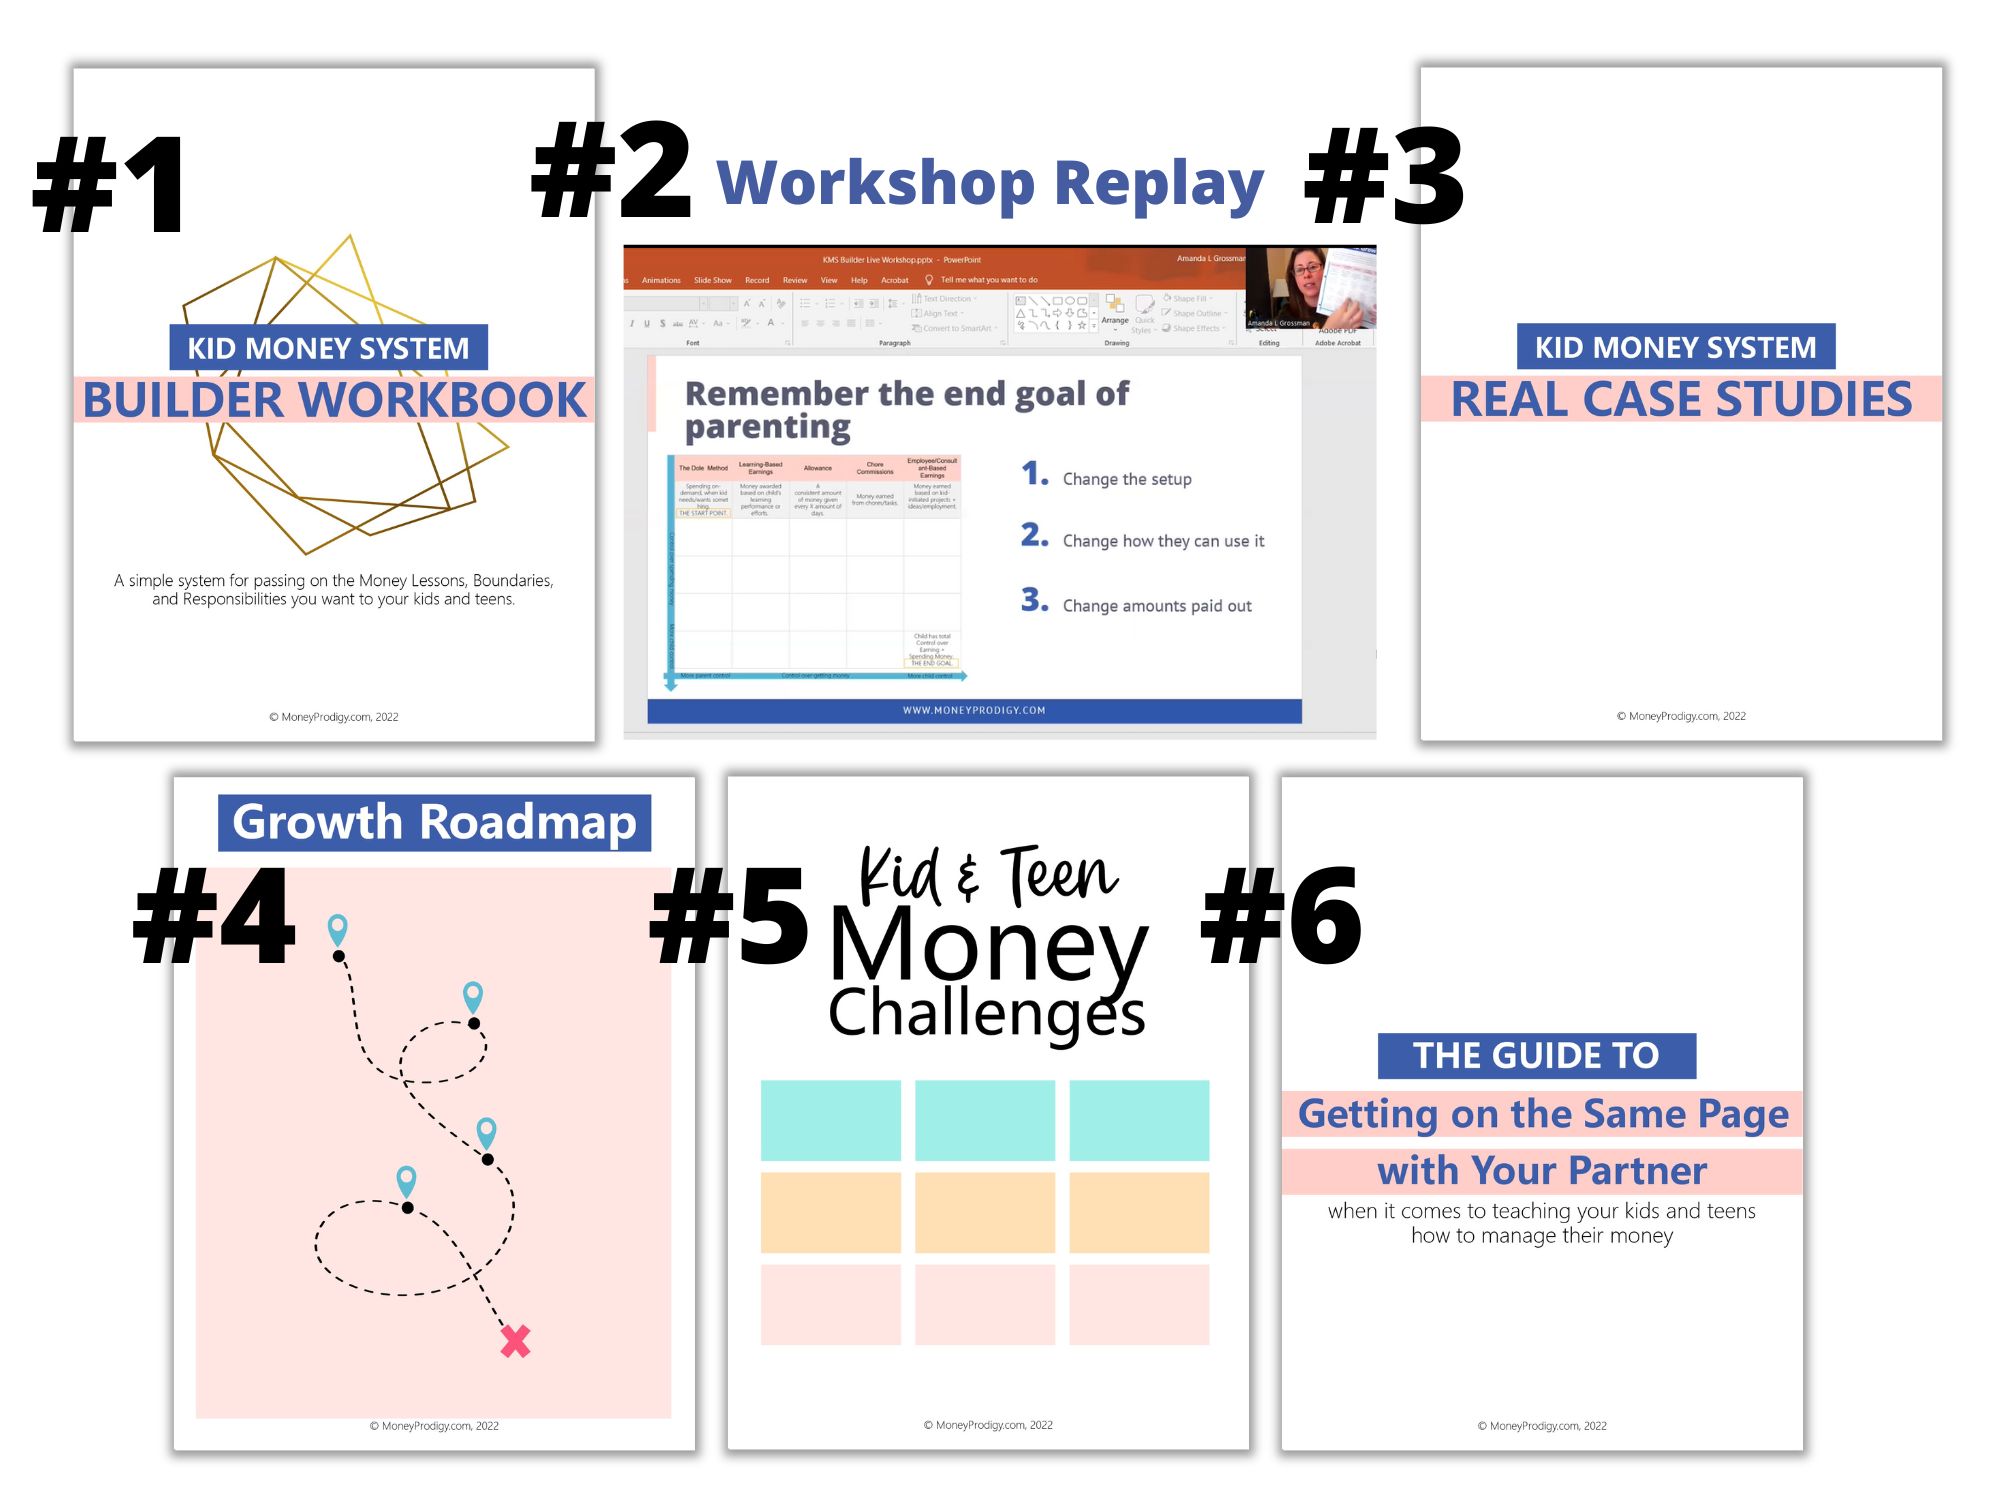 White, navy blue, and light pale worksheets in the Kid Money System Builder